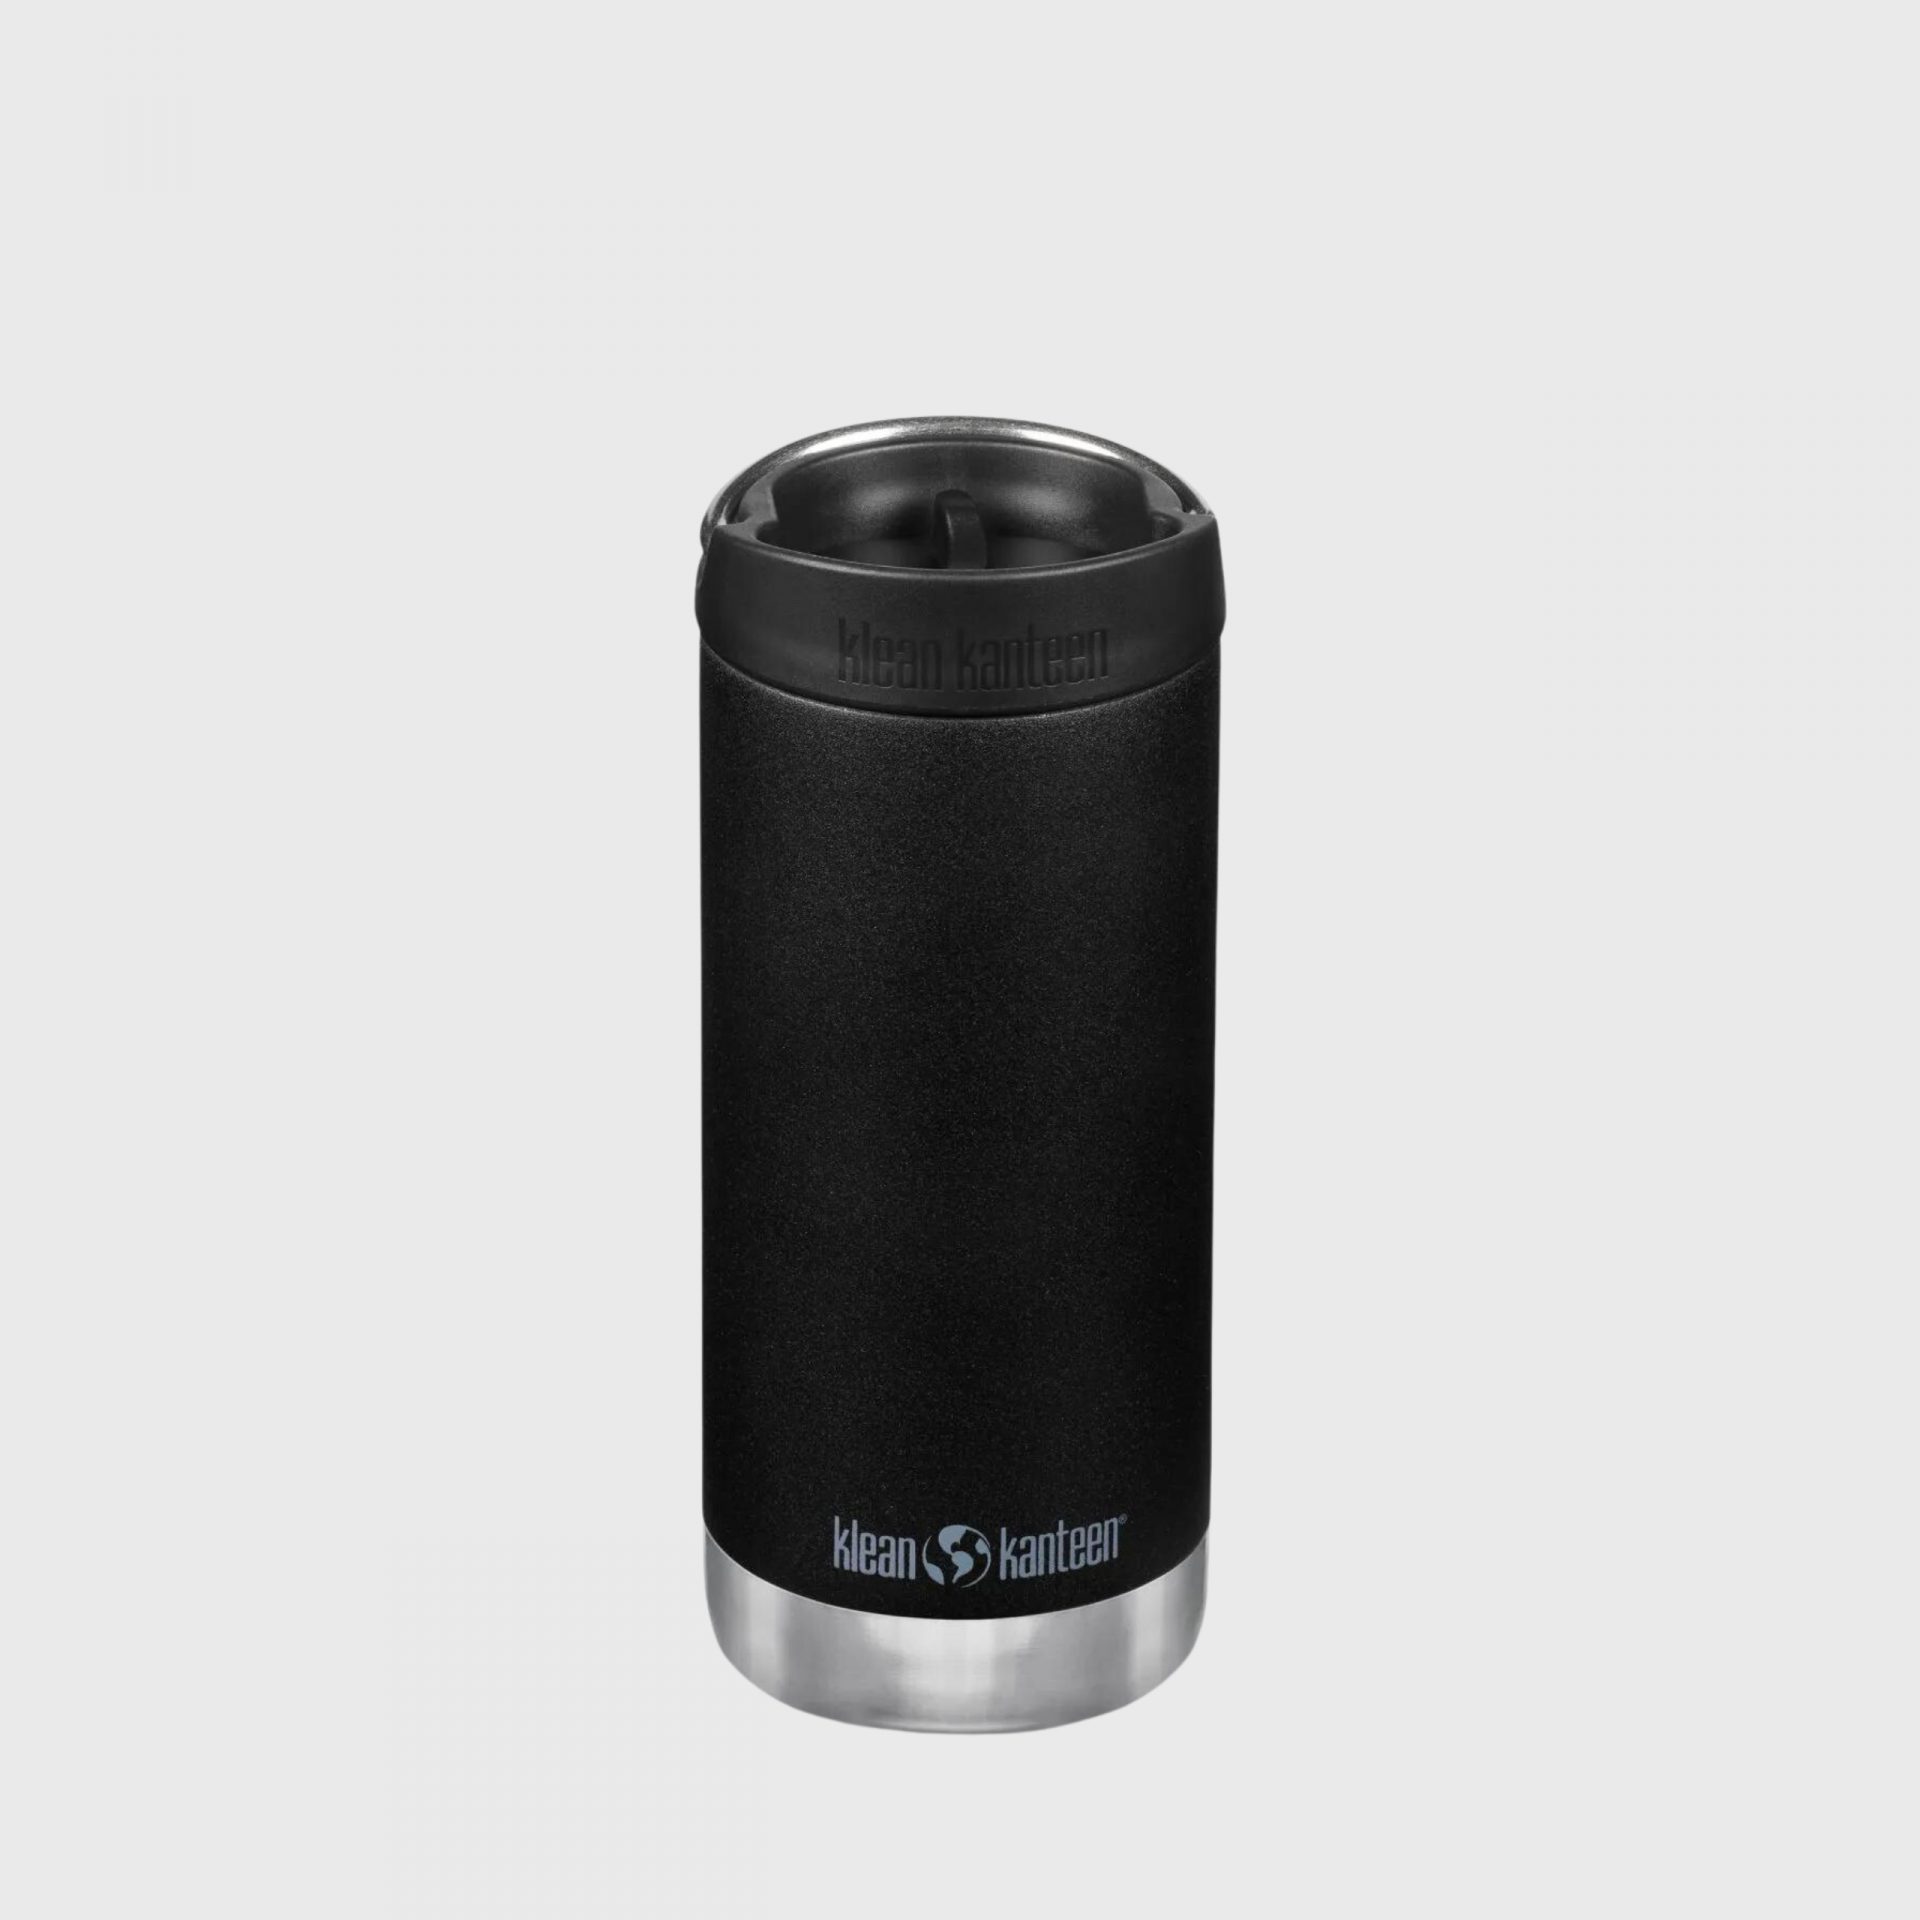 Klean Kanteen Singapore Sustainable Corporate Gifts 12 oz TKWide Insulated Coffee Tumbler with Café Cap Black